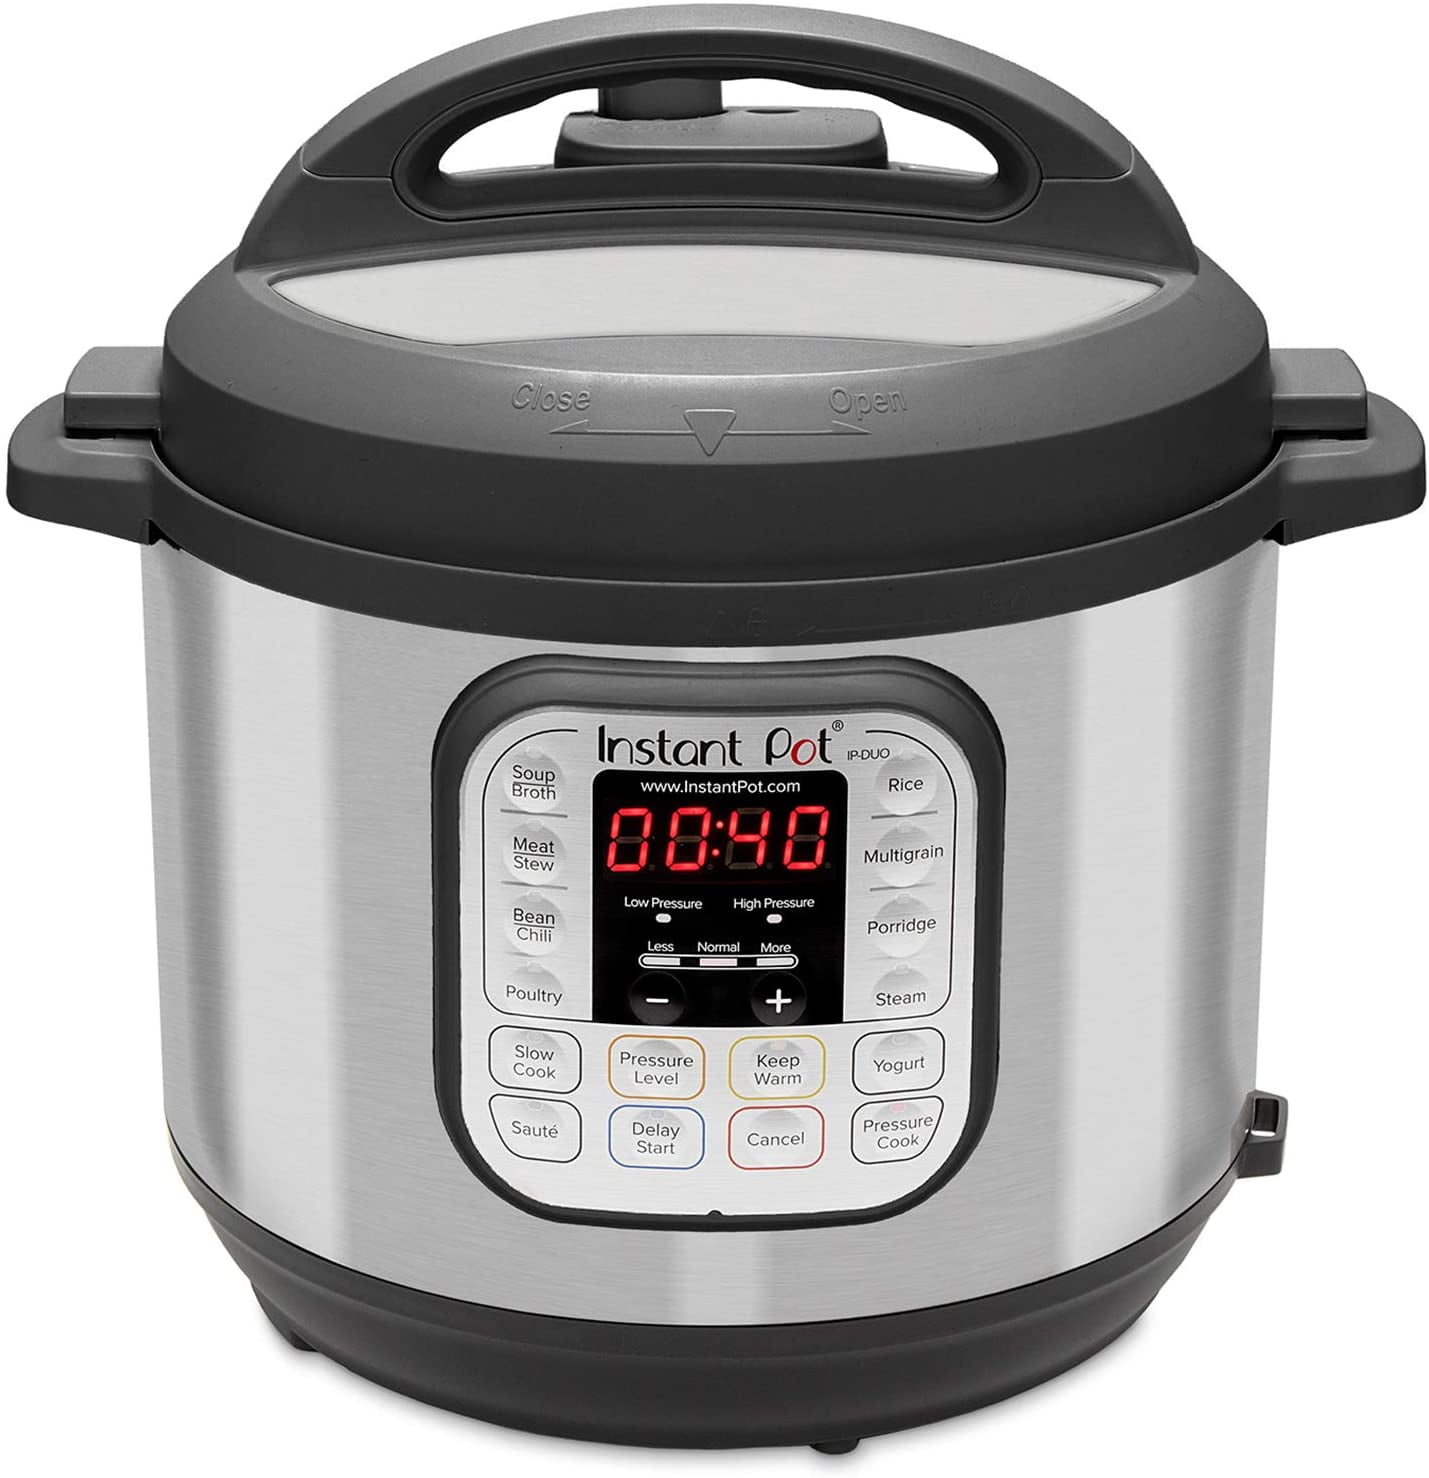  Instant Pot Duo Mini 7-in-1 Electric Pressure Cooker and Mitts  ‚Äì Make Yogurt, Rice, Slow Cook, Saut√©, Steam and More: Home & Kitchen